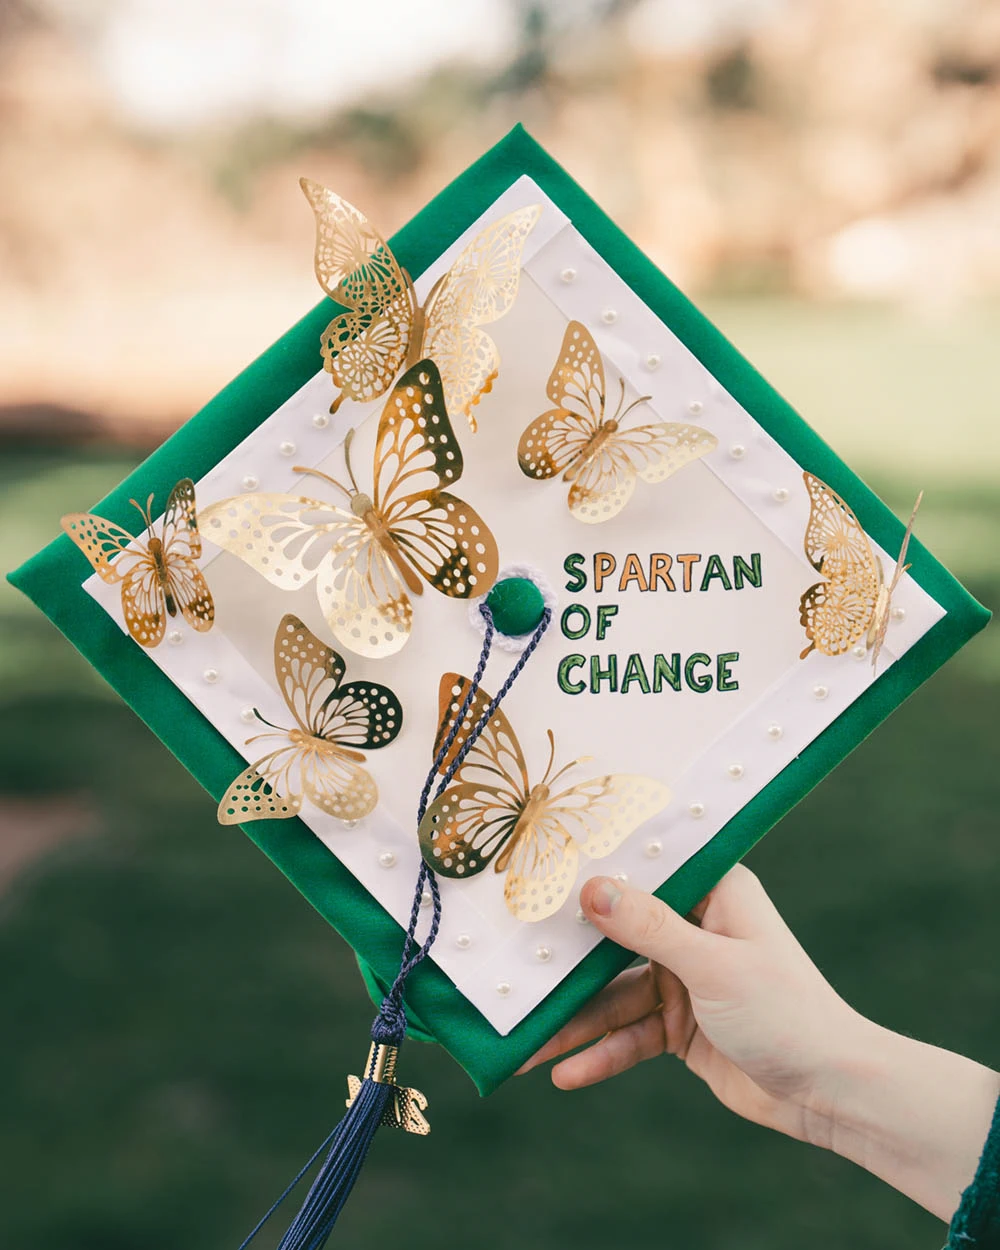 Graduation cap with text Spartan of Change and foil butterflies